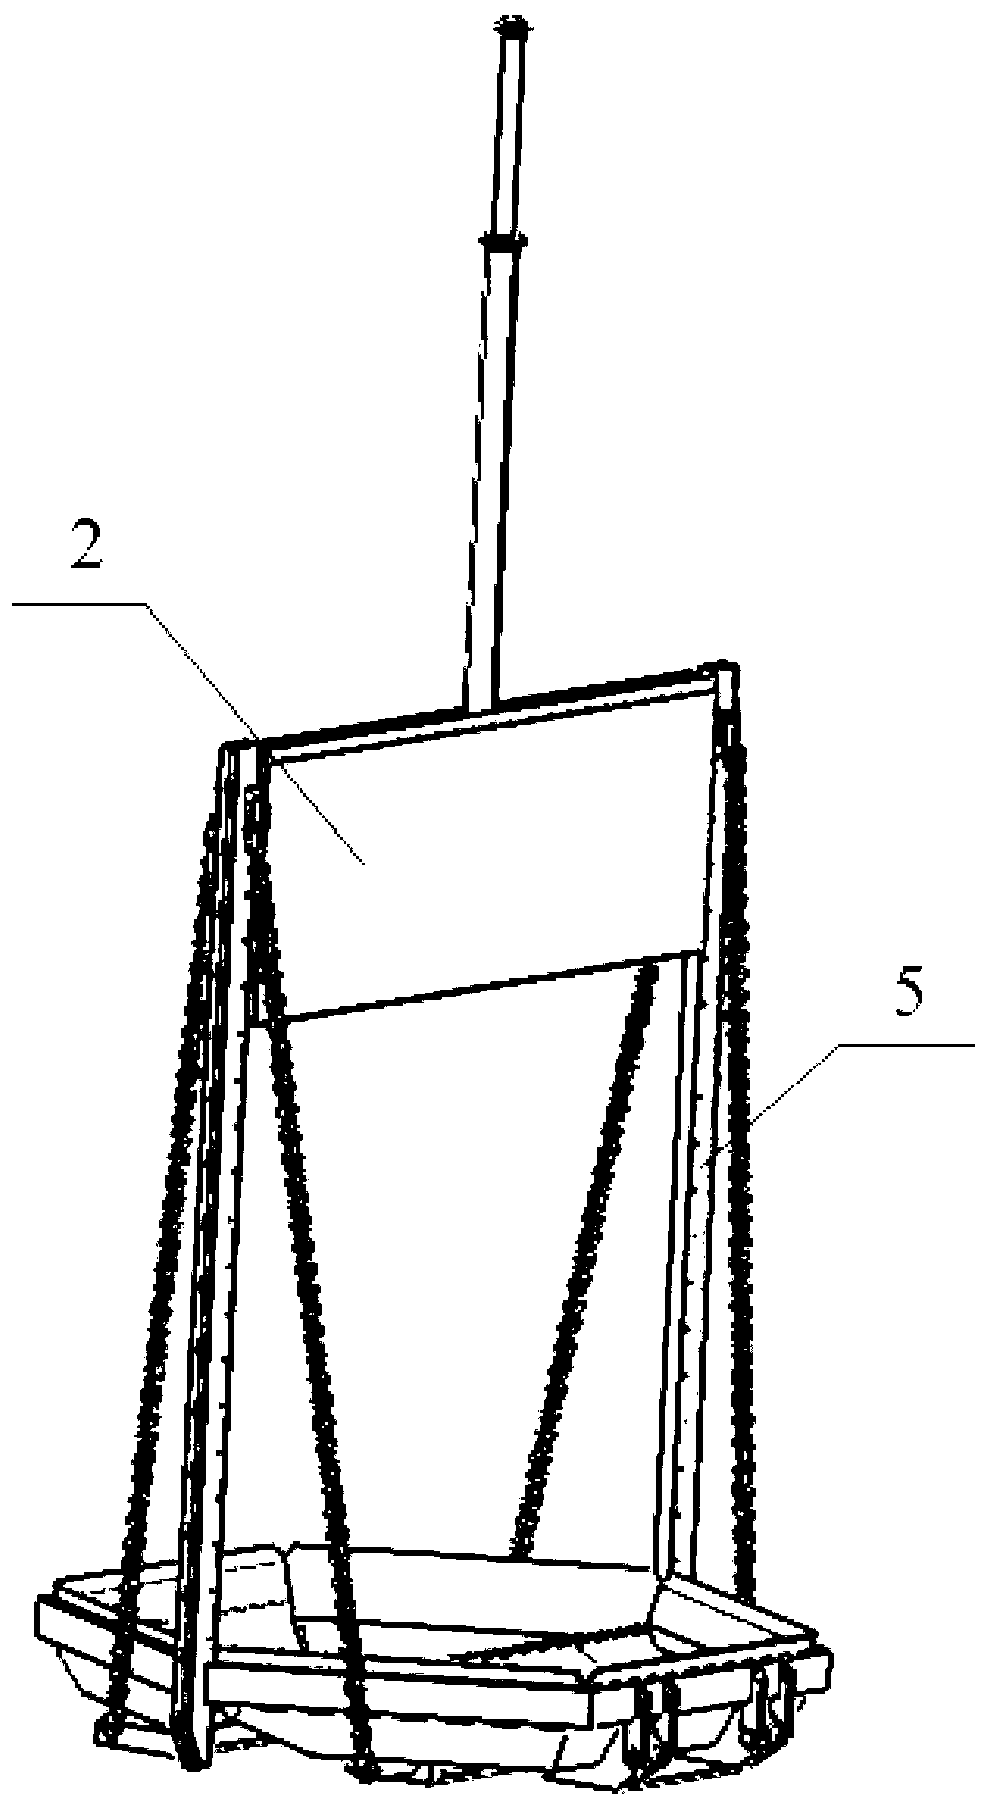 Bottom cover opening and closing mechanism of garbage collection device